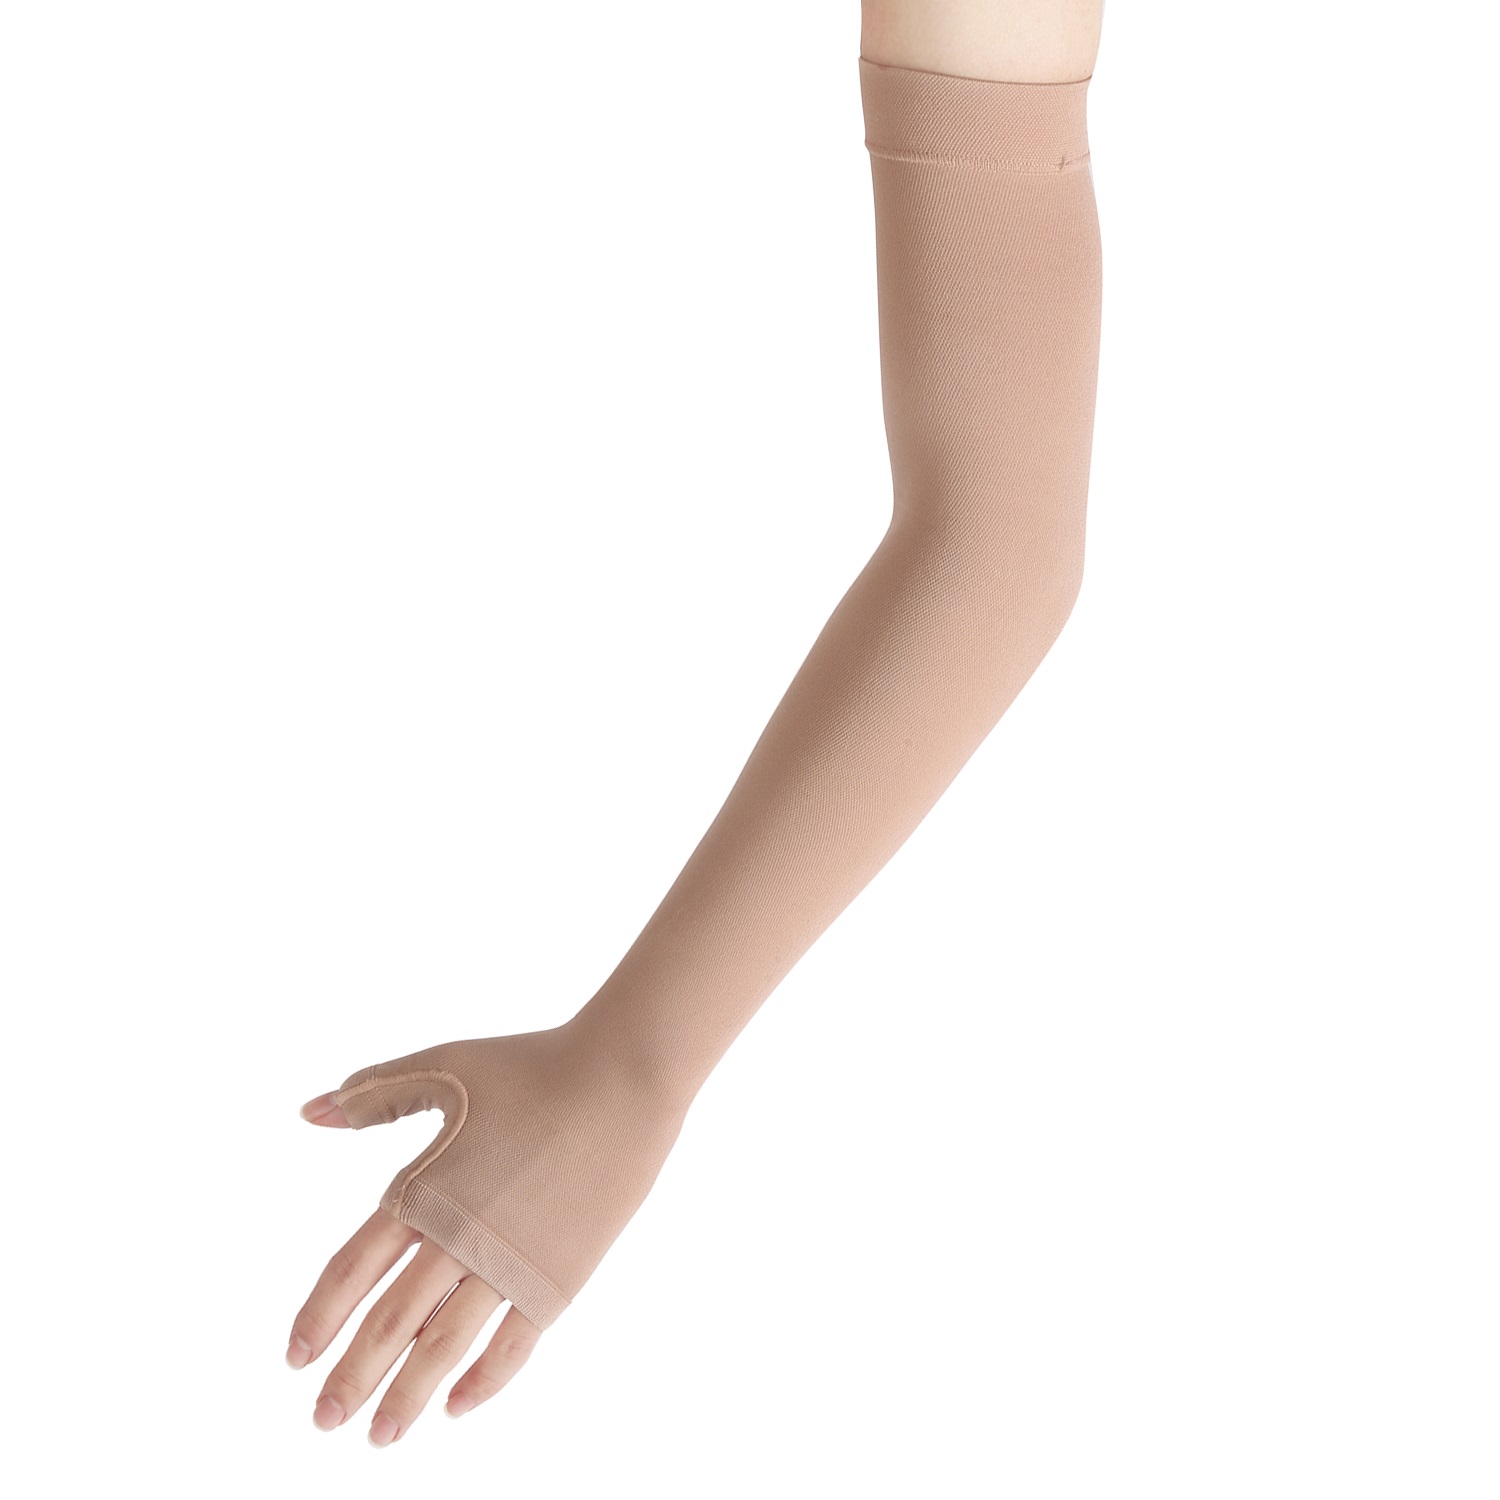 Post Surgery Arm Brace 20-30mmHg Medical Compression Long Arm Sleeve Women for Varicose Veins